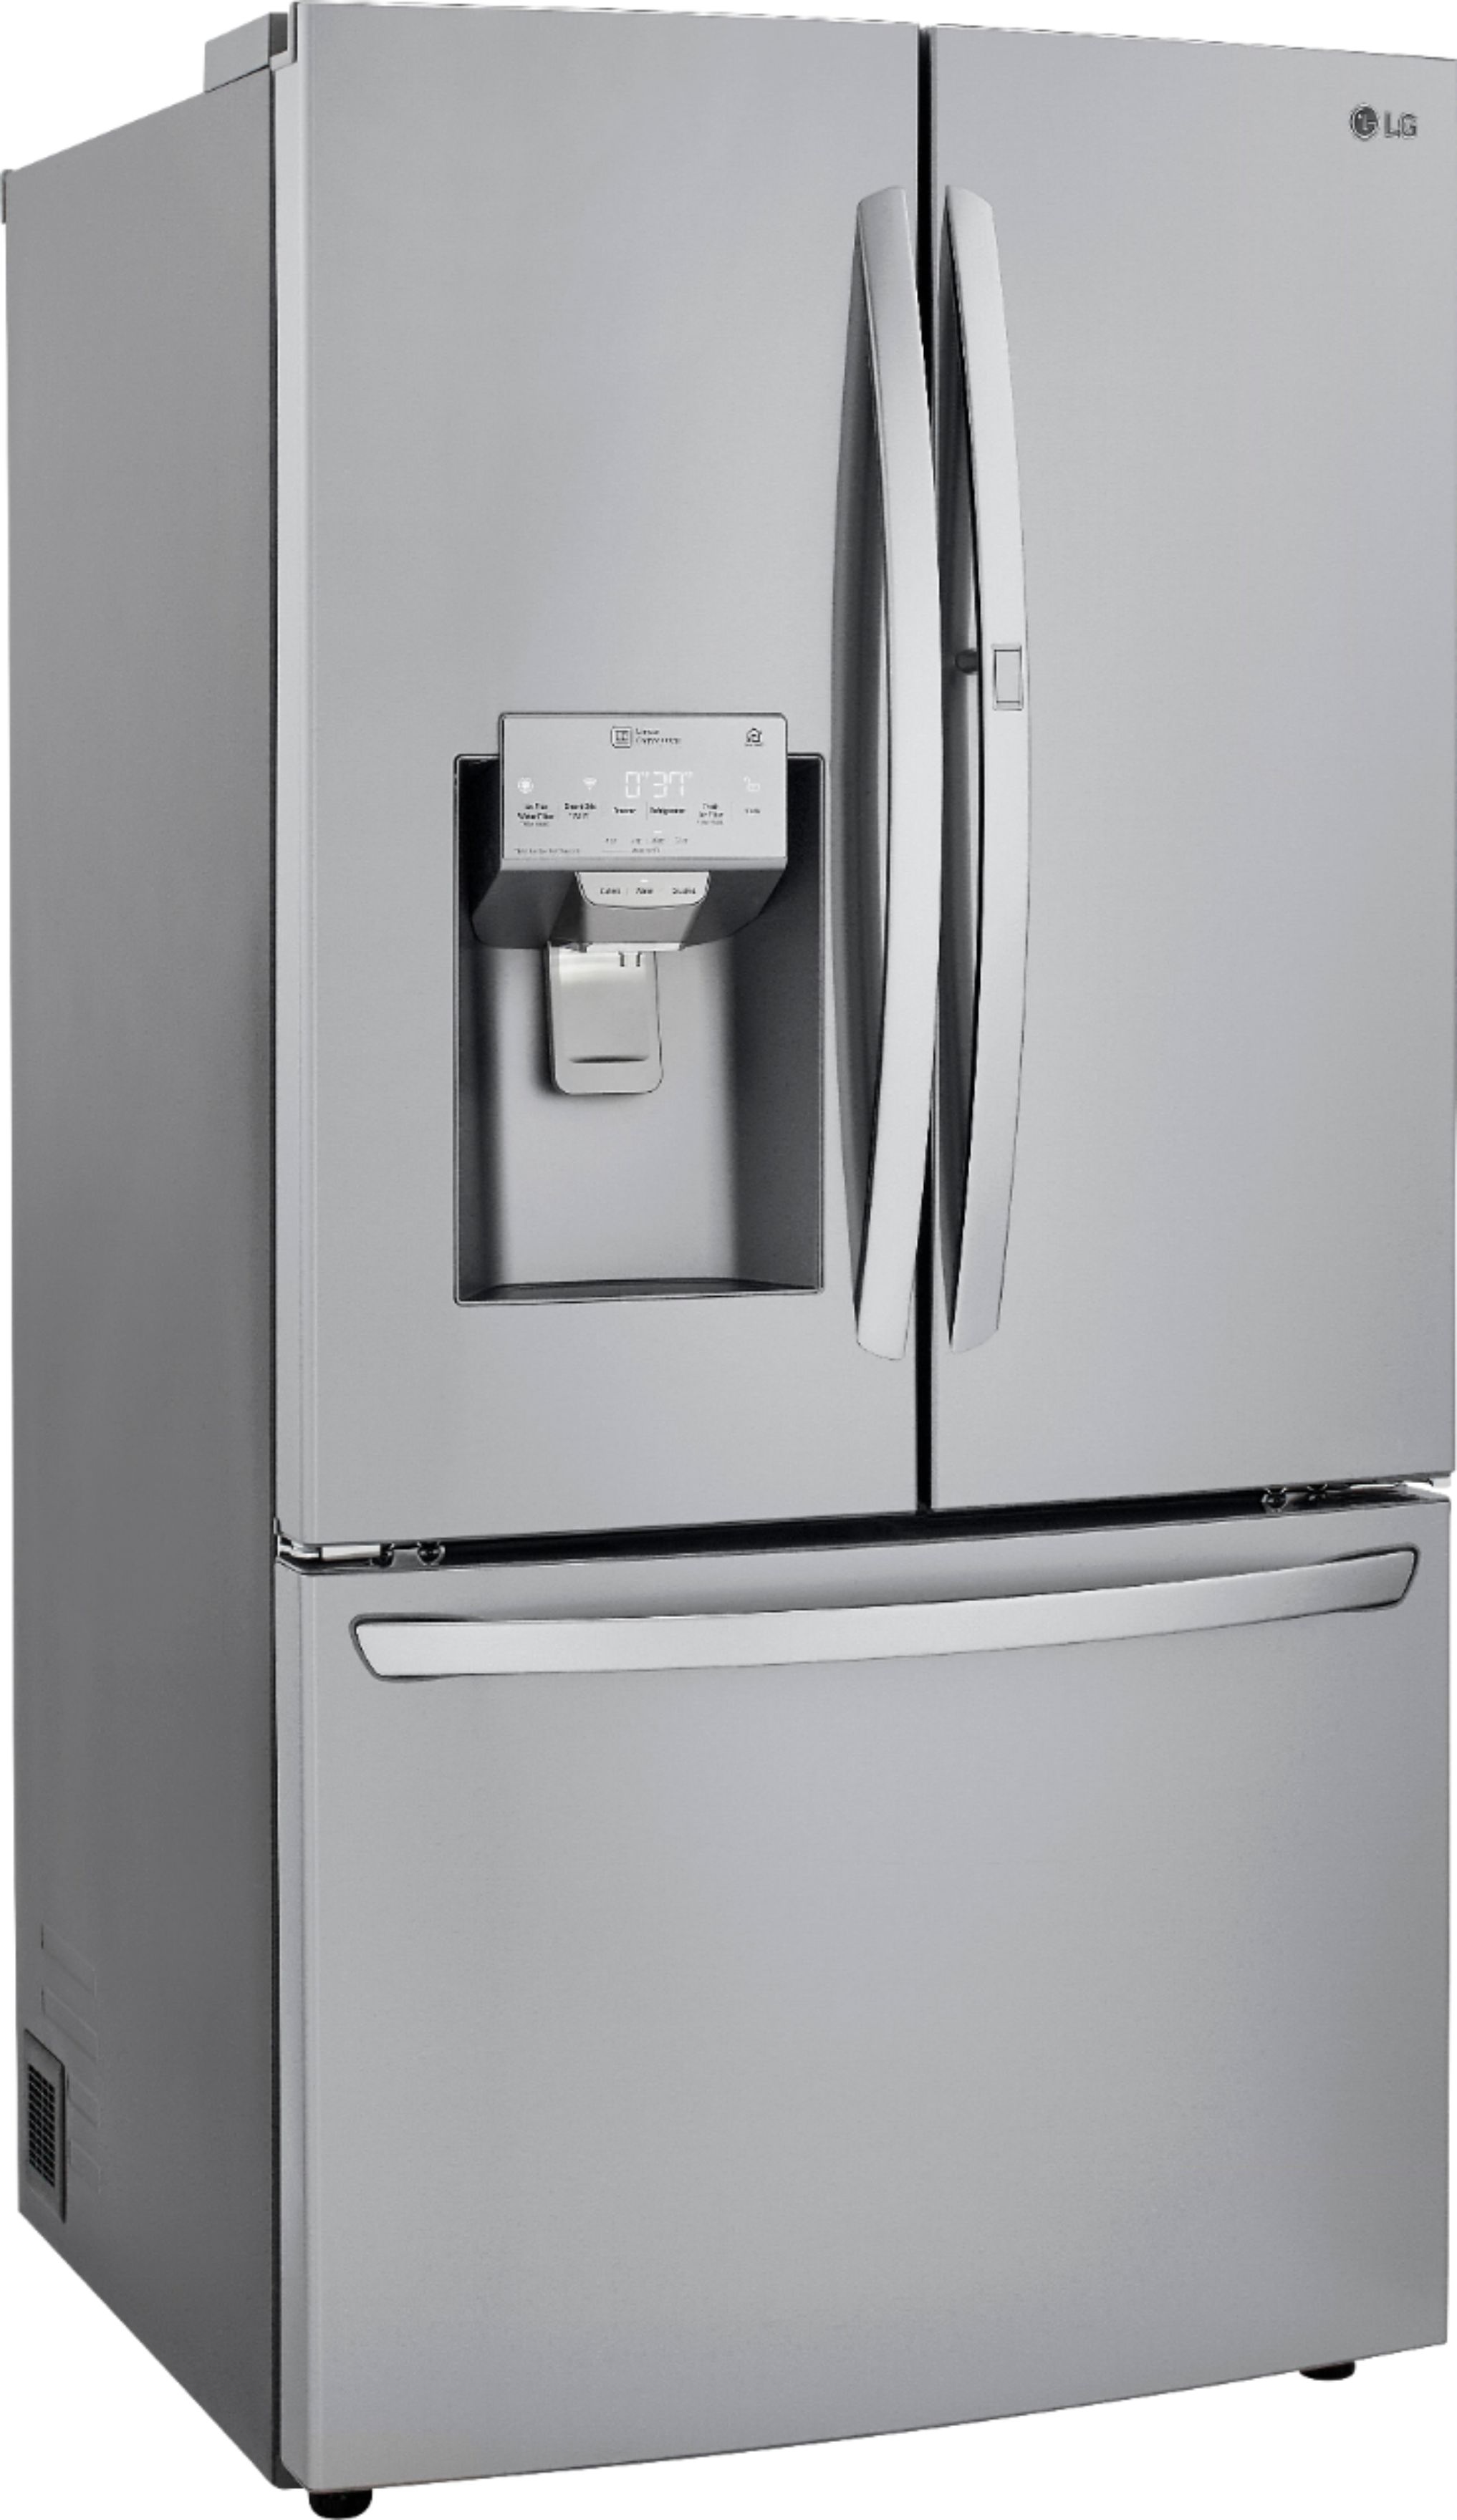 Angle View: LG - 29.7 Cu. Ft. French Door-in-Door Smart Refrigerator with Craft Ice - Stainless Steel